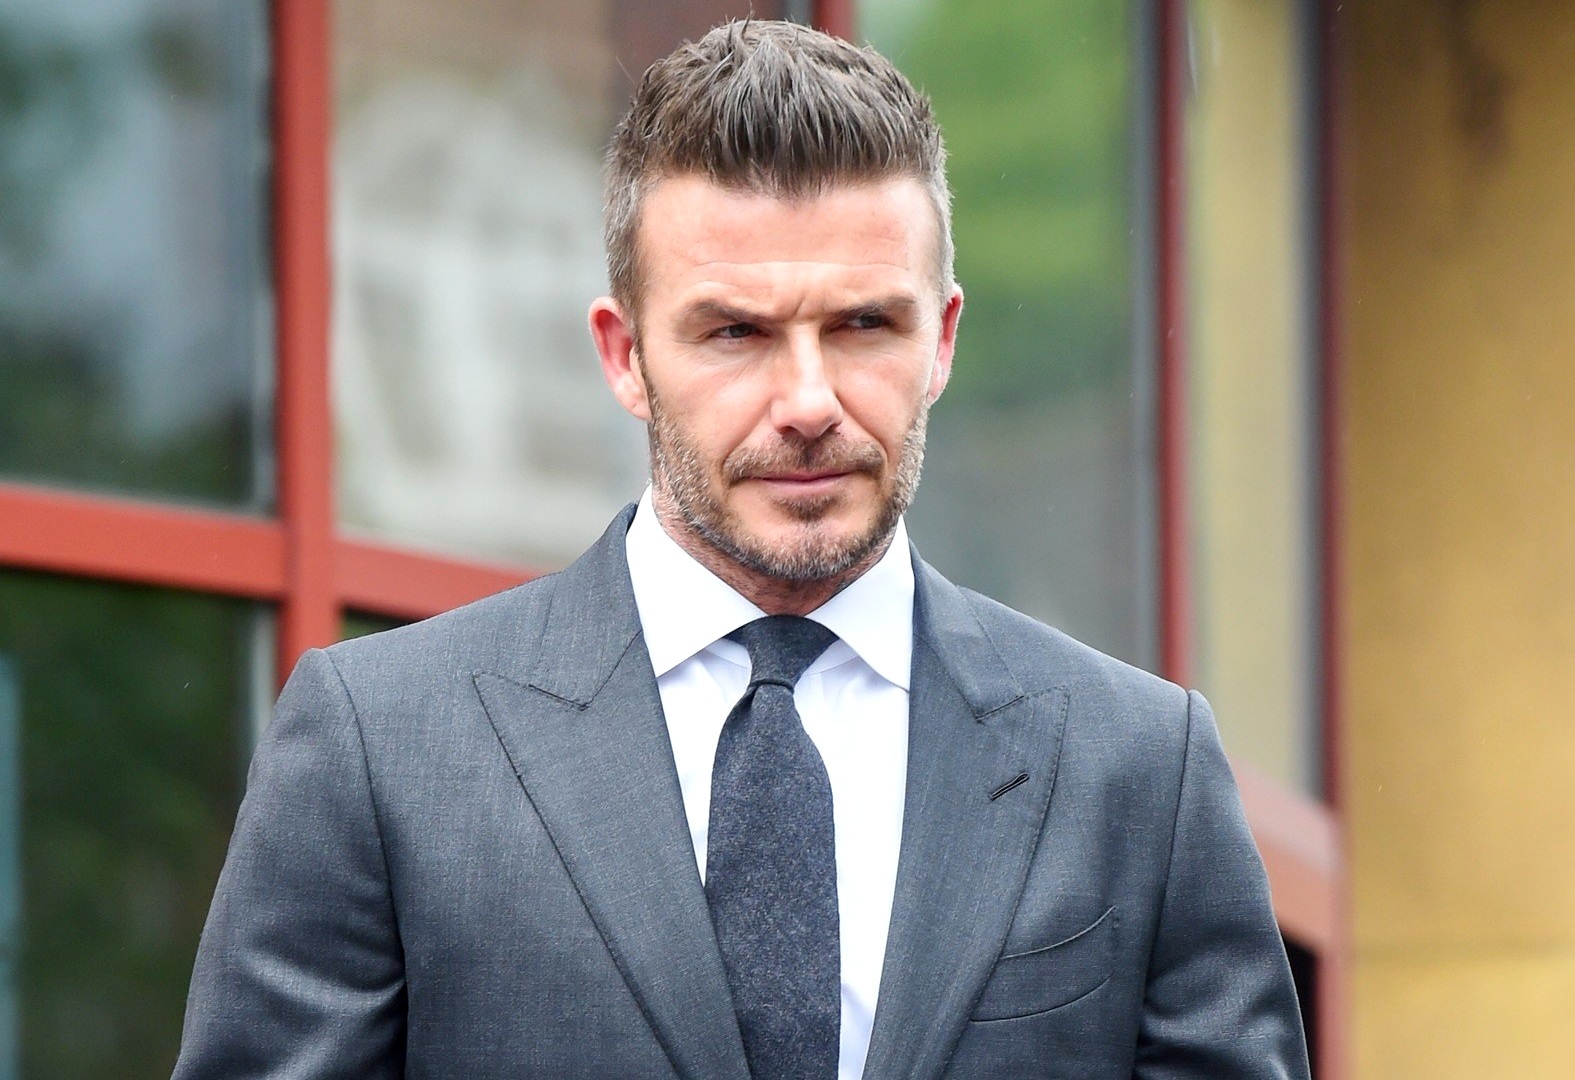 May 9, 2019 - London, London, United Kingdom - David Beckham at court. ..David Beckham leaving the Bromley Magistrates' Court this afternoon...David Beckham faces a possible driving ban when his mobile phone case returns to court...The former England captain must ''show cause why he shouldn't be disqualified'', court staff said. Beckham admitted he was using his mobile phone while driving in London's West End on November 21., Image: 432019671, License: Rights-managed, Restrictions: * China, France, Italy, Spain, Taiwan and UK Rights OUT *, Model Release: no, Credit line: Profimedia, Zuma Press - Entertaiment